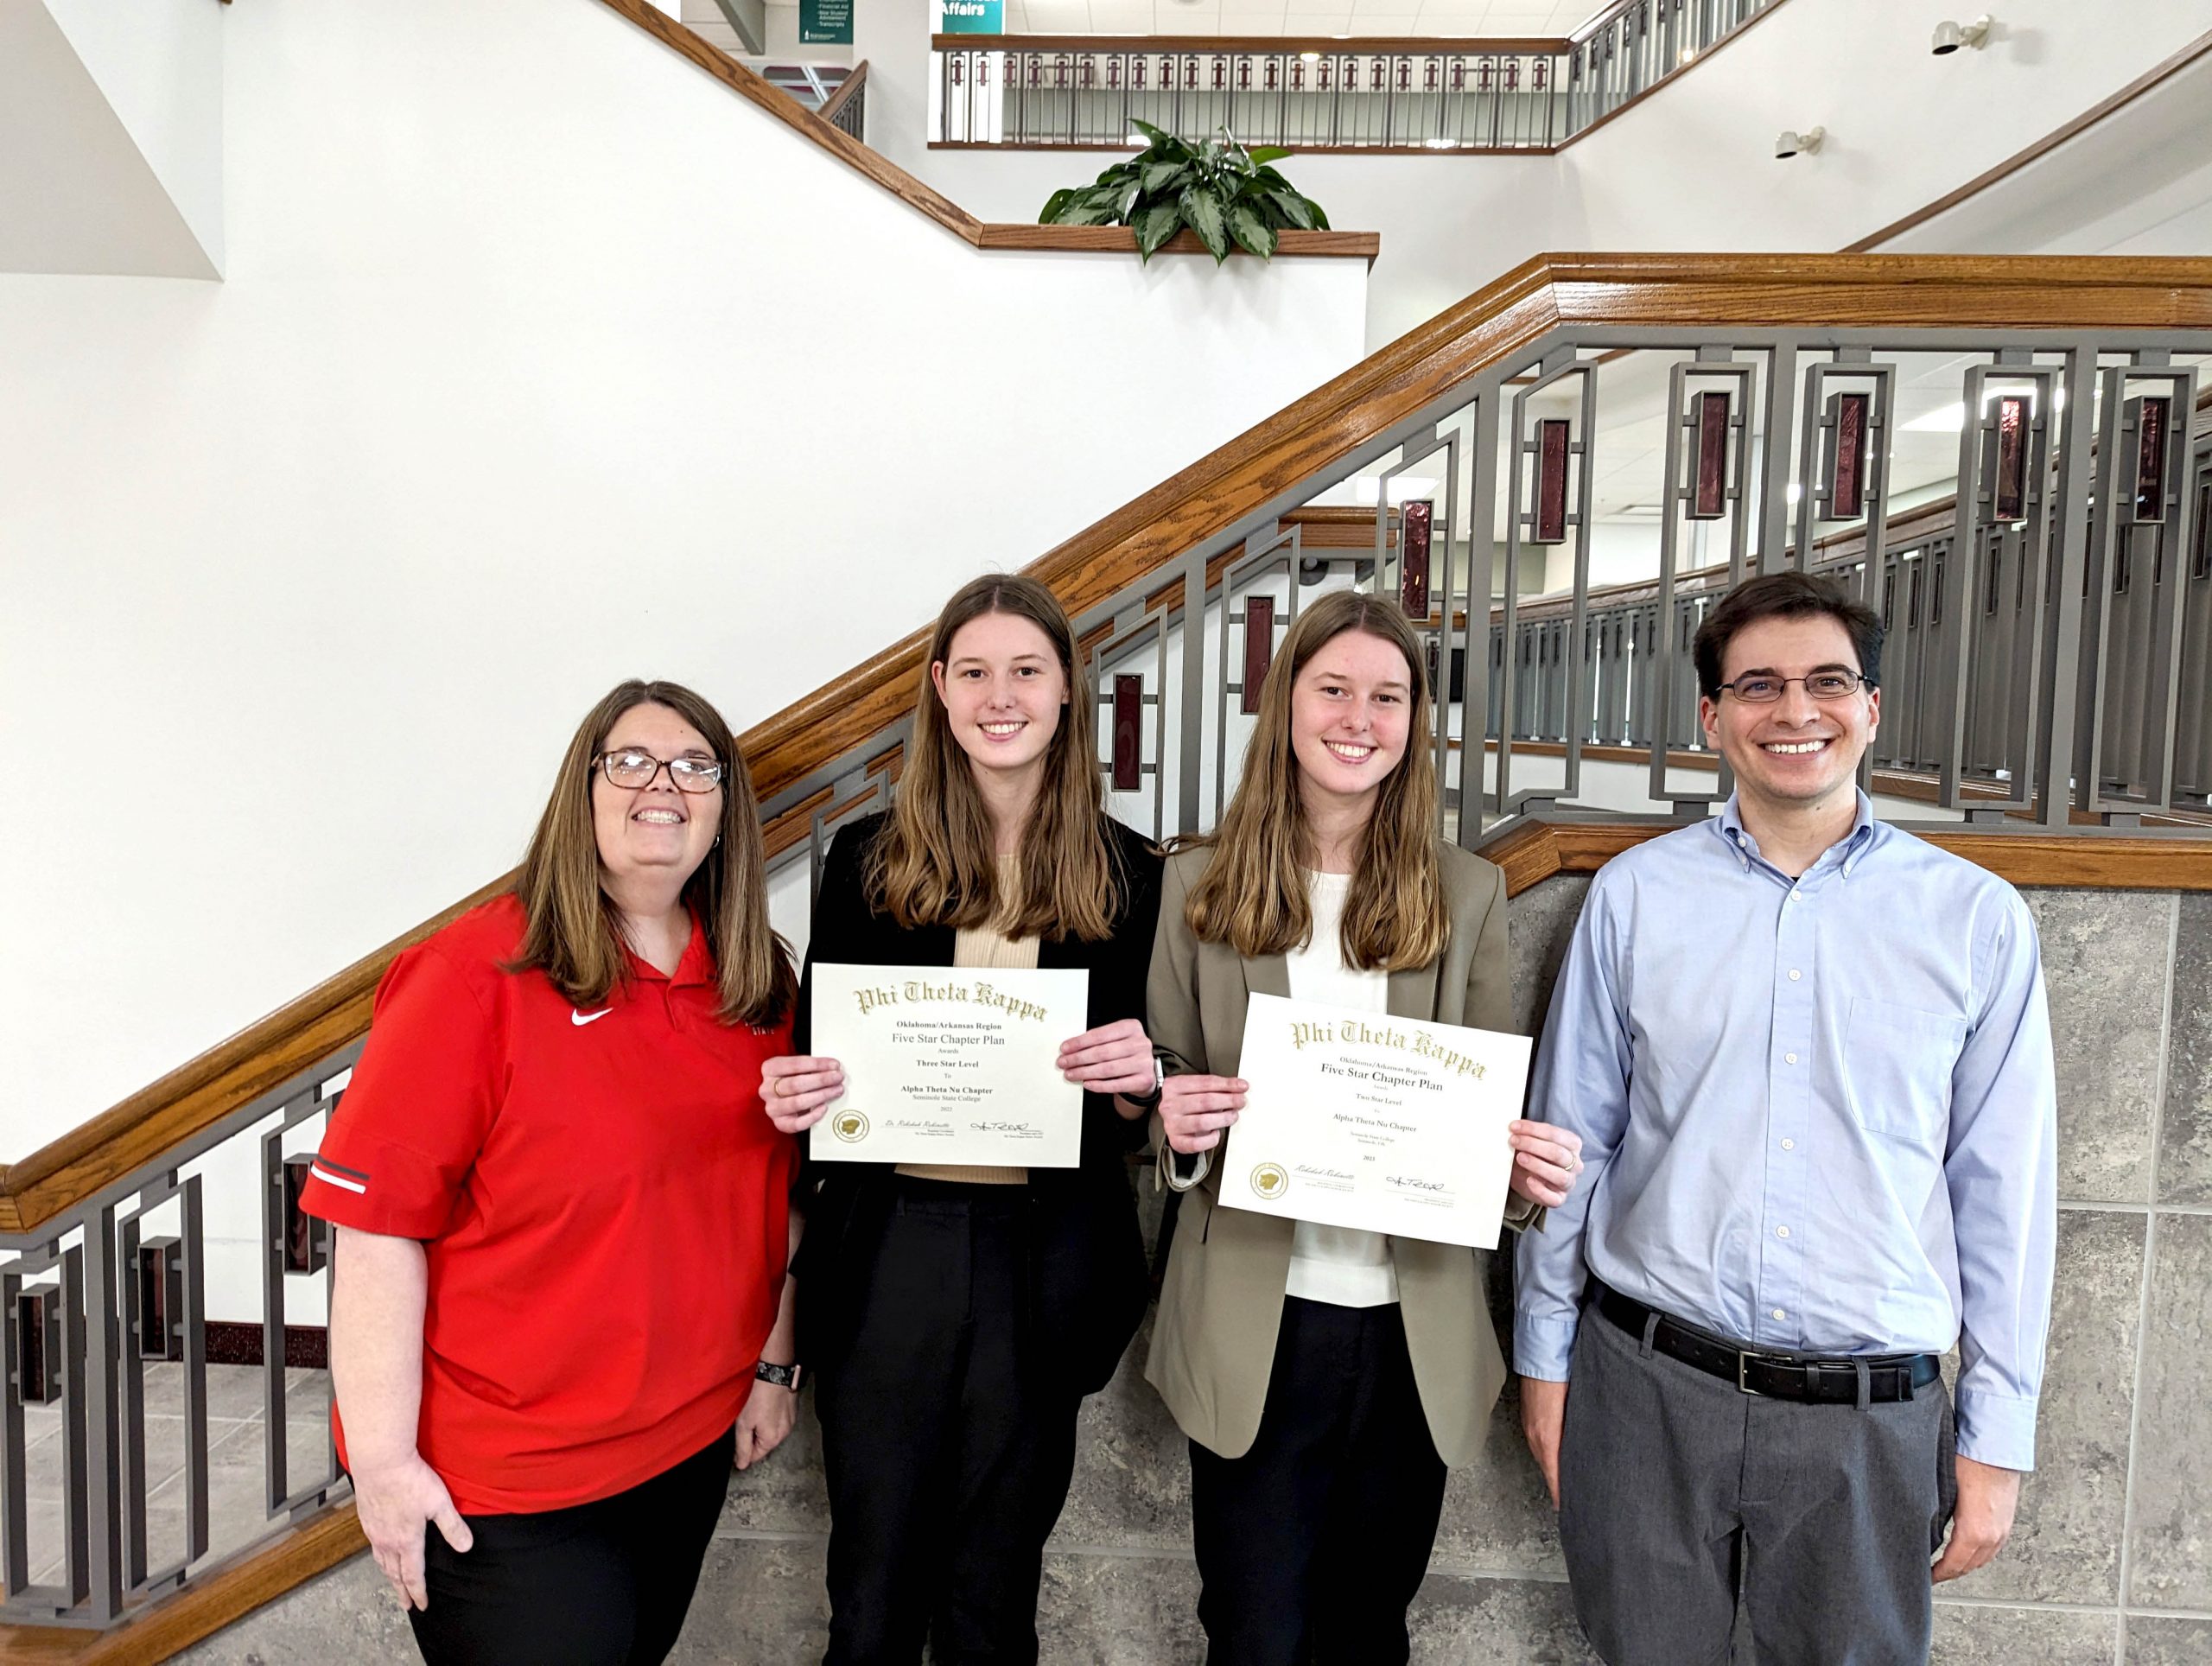 SSC Honor Society Members Attend Regional Conference